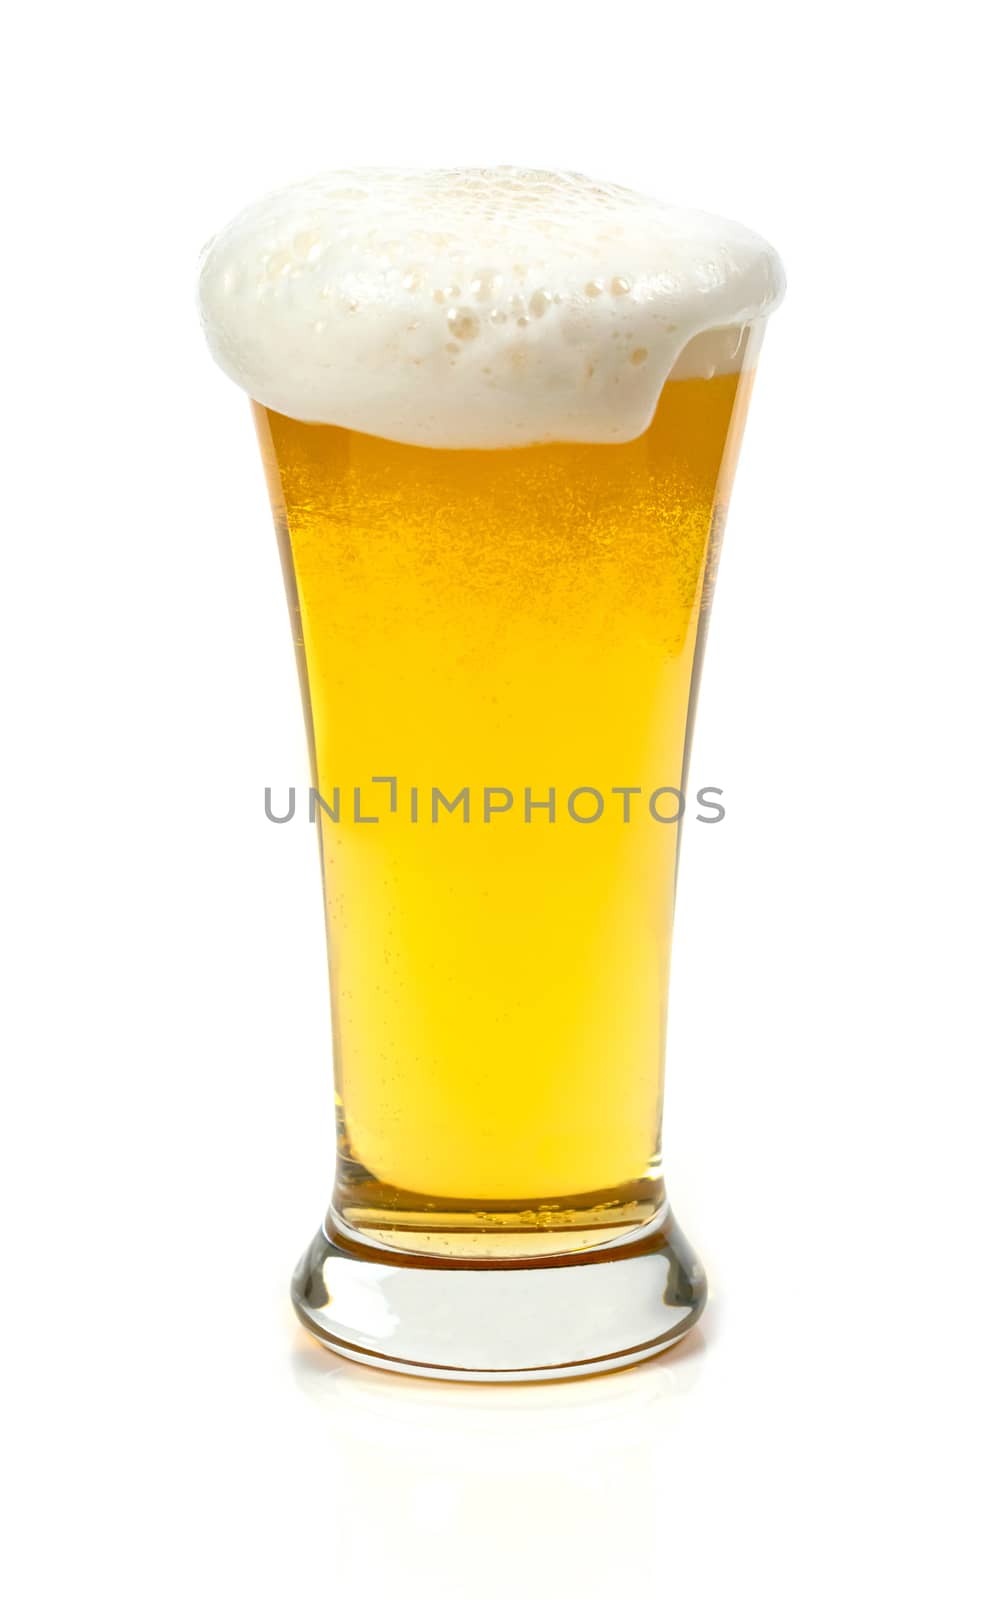 Beer in a glass on white background